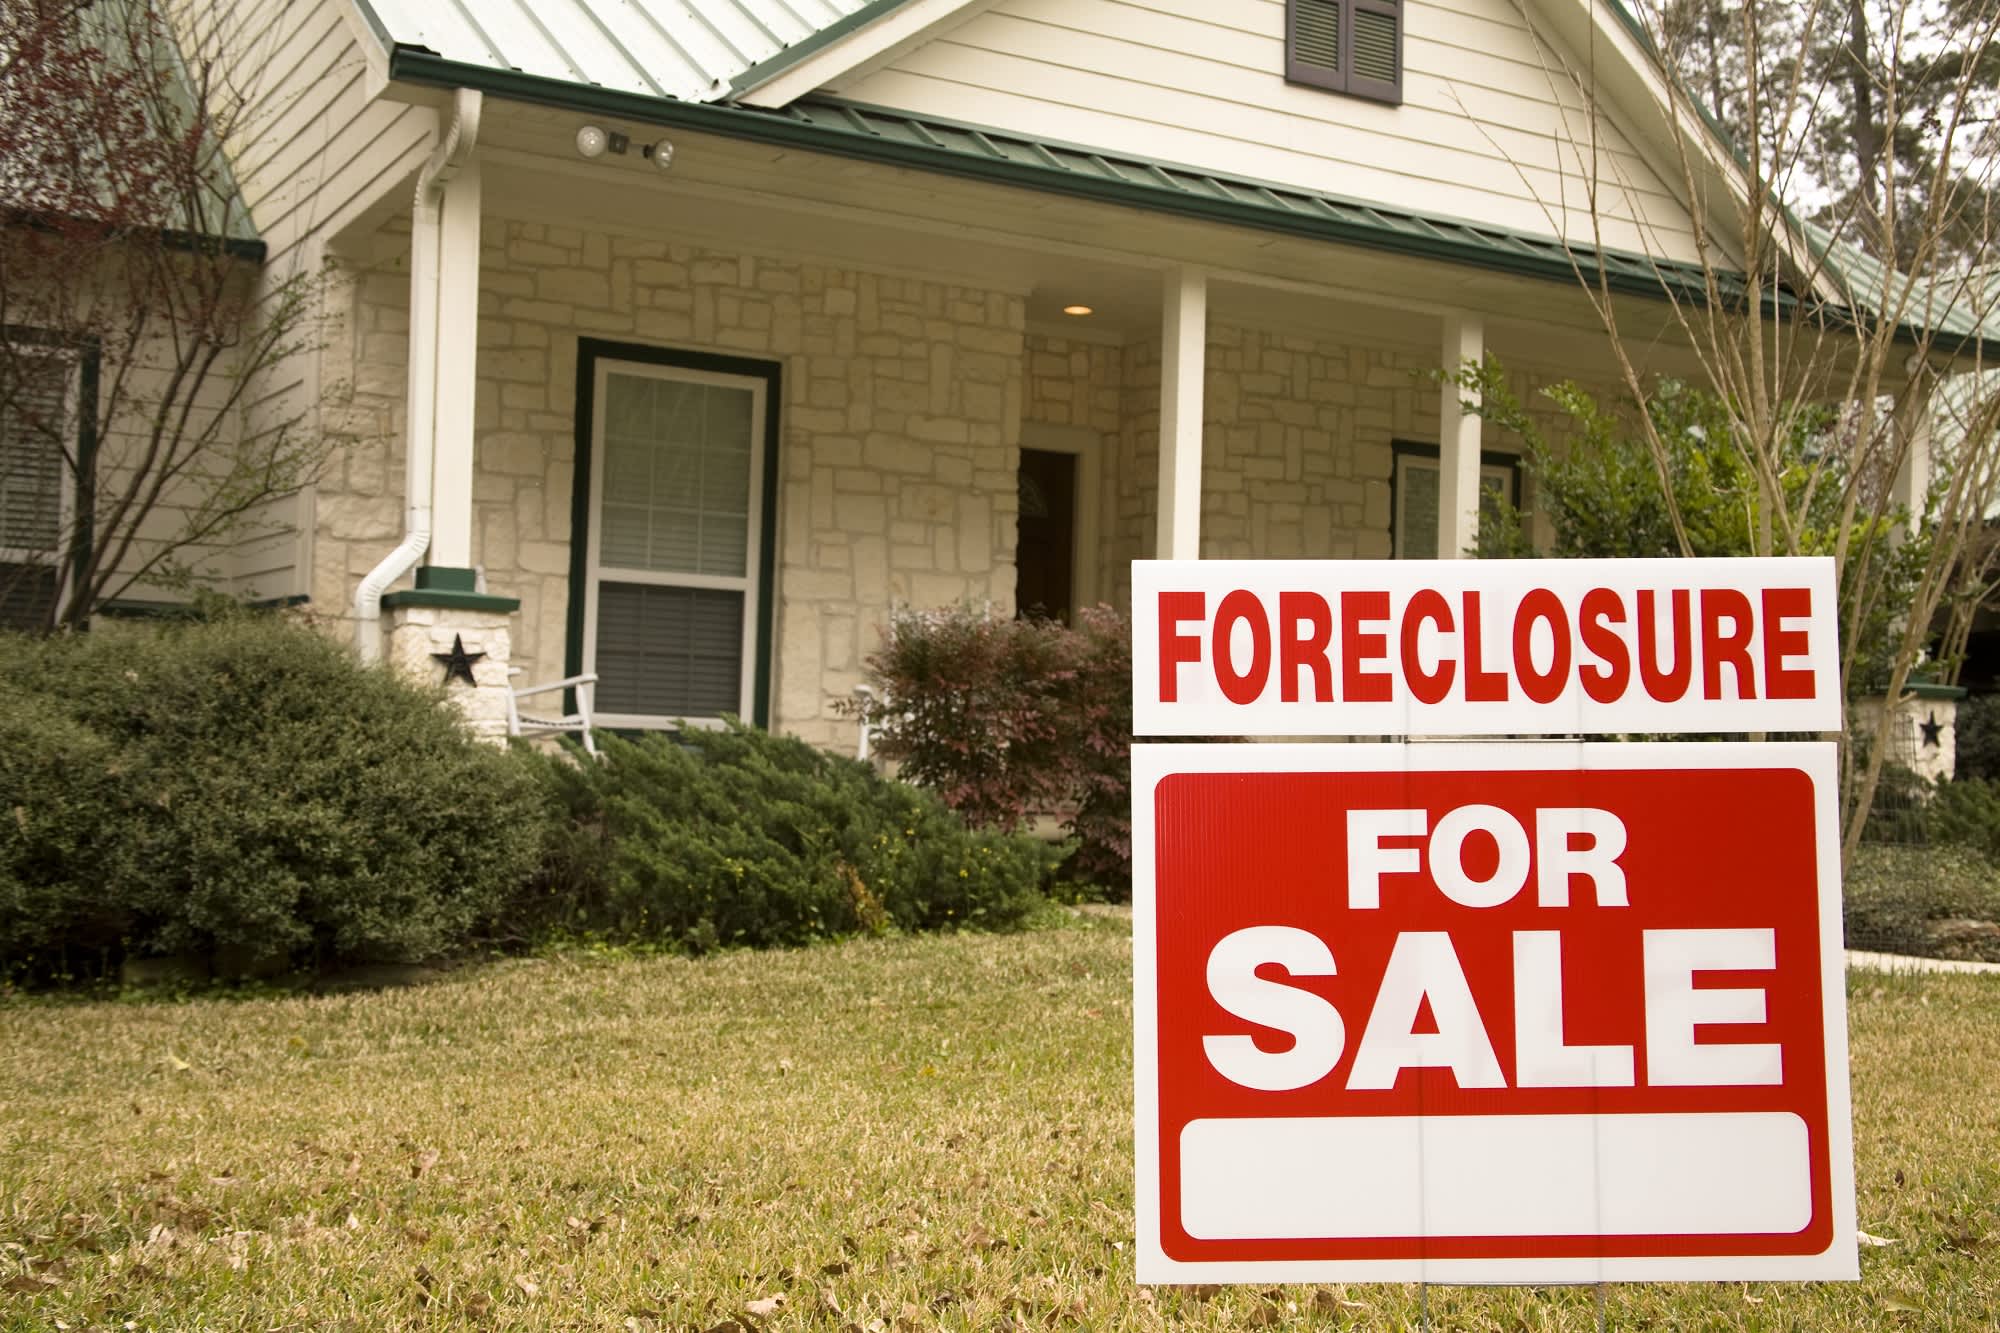 Consumer protection group proposes rule to prevent foreclosures by 2022